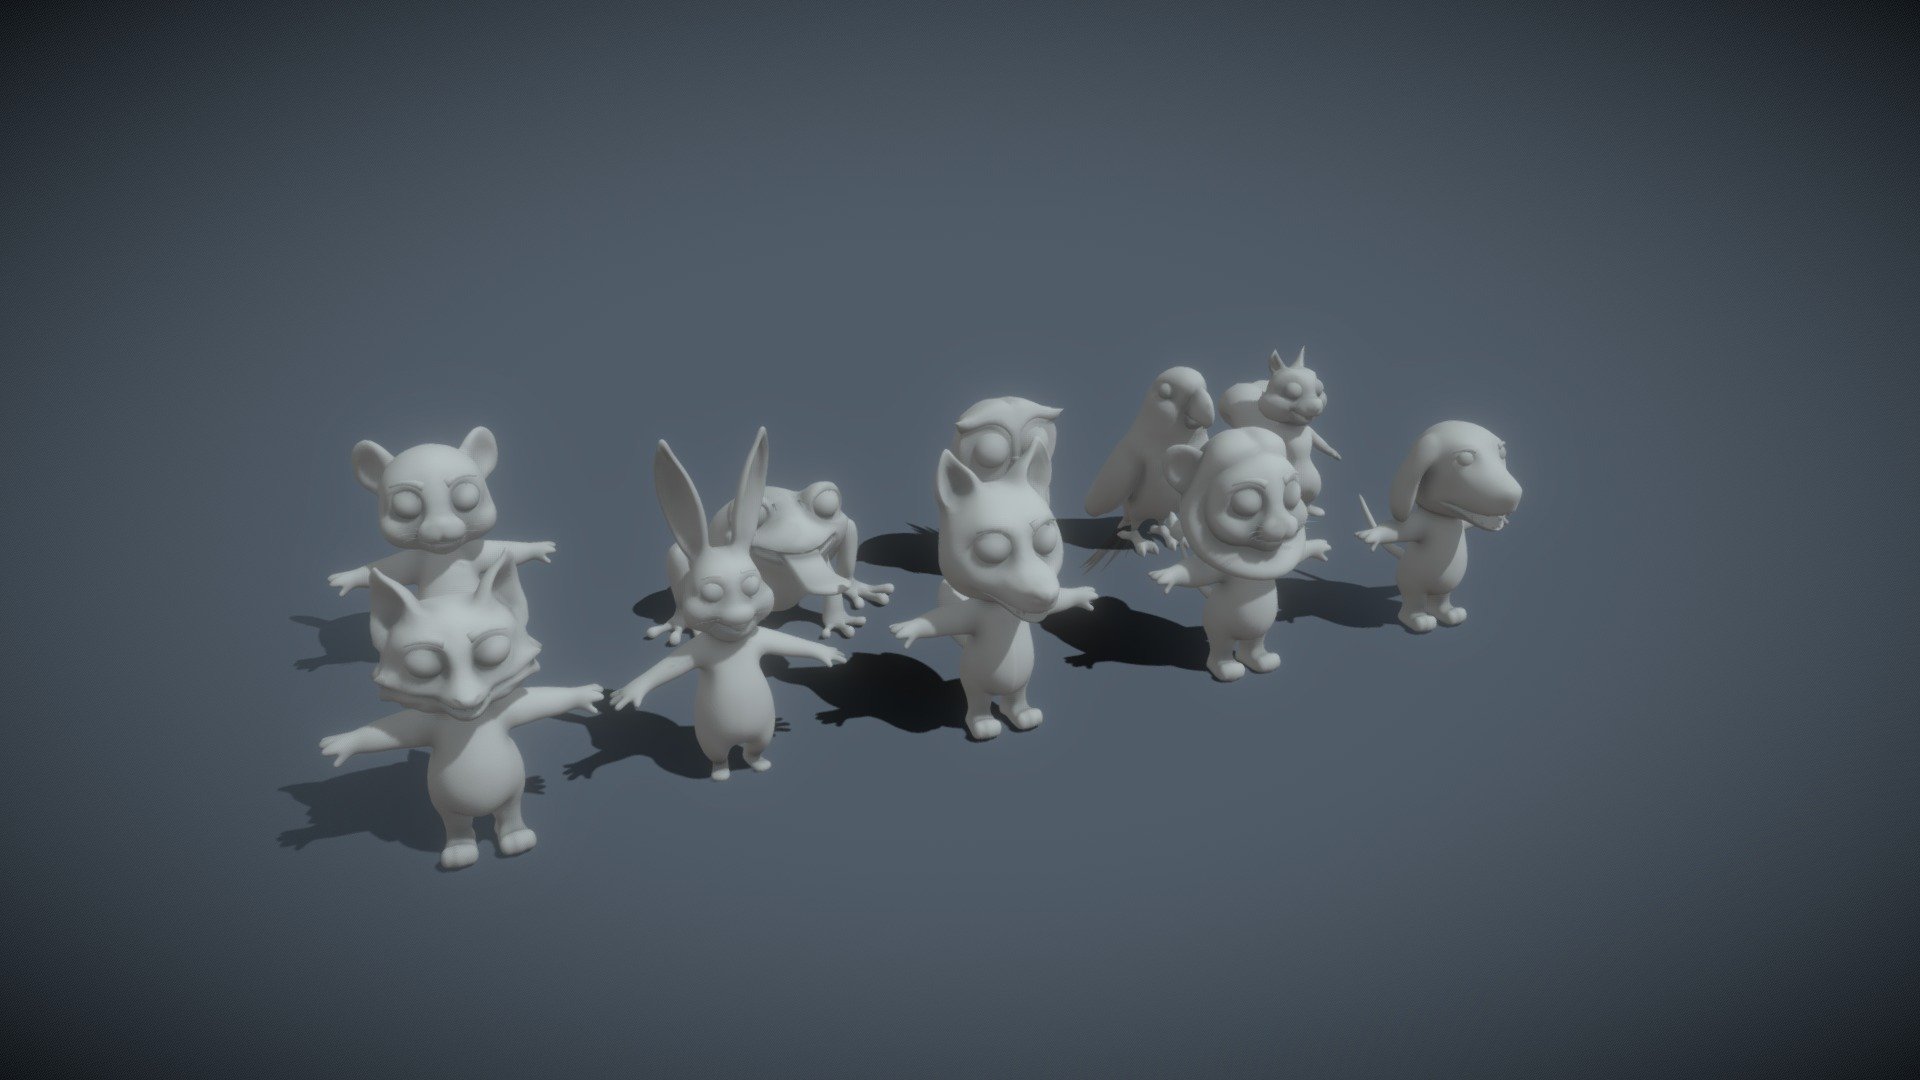 Cartoon Animals Rigged Base Mesh 10 Models Pack Vol 1. consists of 10 cartoon/stylized rigged animal base mesh models:  




Owl Rigged Base (10,551 P, 10,679 V)

Squirrel Rigged Base (2,164 P, 1,761 V)

Rabbit Rigged Base (7,968 P, 7,922 Vertices)

Frog Rigged Base (4,212 Polygons, 4,138 V)

Ara Parrot Rigged (4,275 P, 3,983 V)

Lion Rigged Base (7,218 P, 6,884 V)

Tiger Rigged Base (6,120 P, 5,789 V)

Wolf Rigged Base (11,748 P, 11,452 V)

Fox Rigged Base (10,284 P, 9,863 V)

Hound Dog Rigged Base (10,250 P, 9,953 V)

Technical details:  




File formats included are: FBX, GLB, BLEND, gLTF (generated), USDZ (generated)

You can easily import model(s) into: Blender, Maya, 3DS Max, Houdini, Cinema 4D, Unity, Unreal, &hellip;

Native software file format: BLEND

All models are rigged

Only following formats contain rig: BLEND, FBX, GLB

Polygons: 74,790 (around 7.5k per model)

Vertices: 72,424 (around 7.2k per model)
 - Cartoon Animals 10 Rigged Base Mesh Vol 1 - Buy Royalty Free 3D model by 3DDisco 3d model